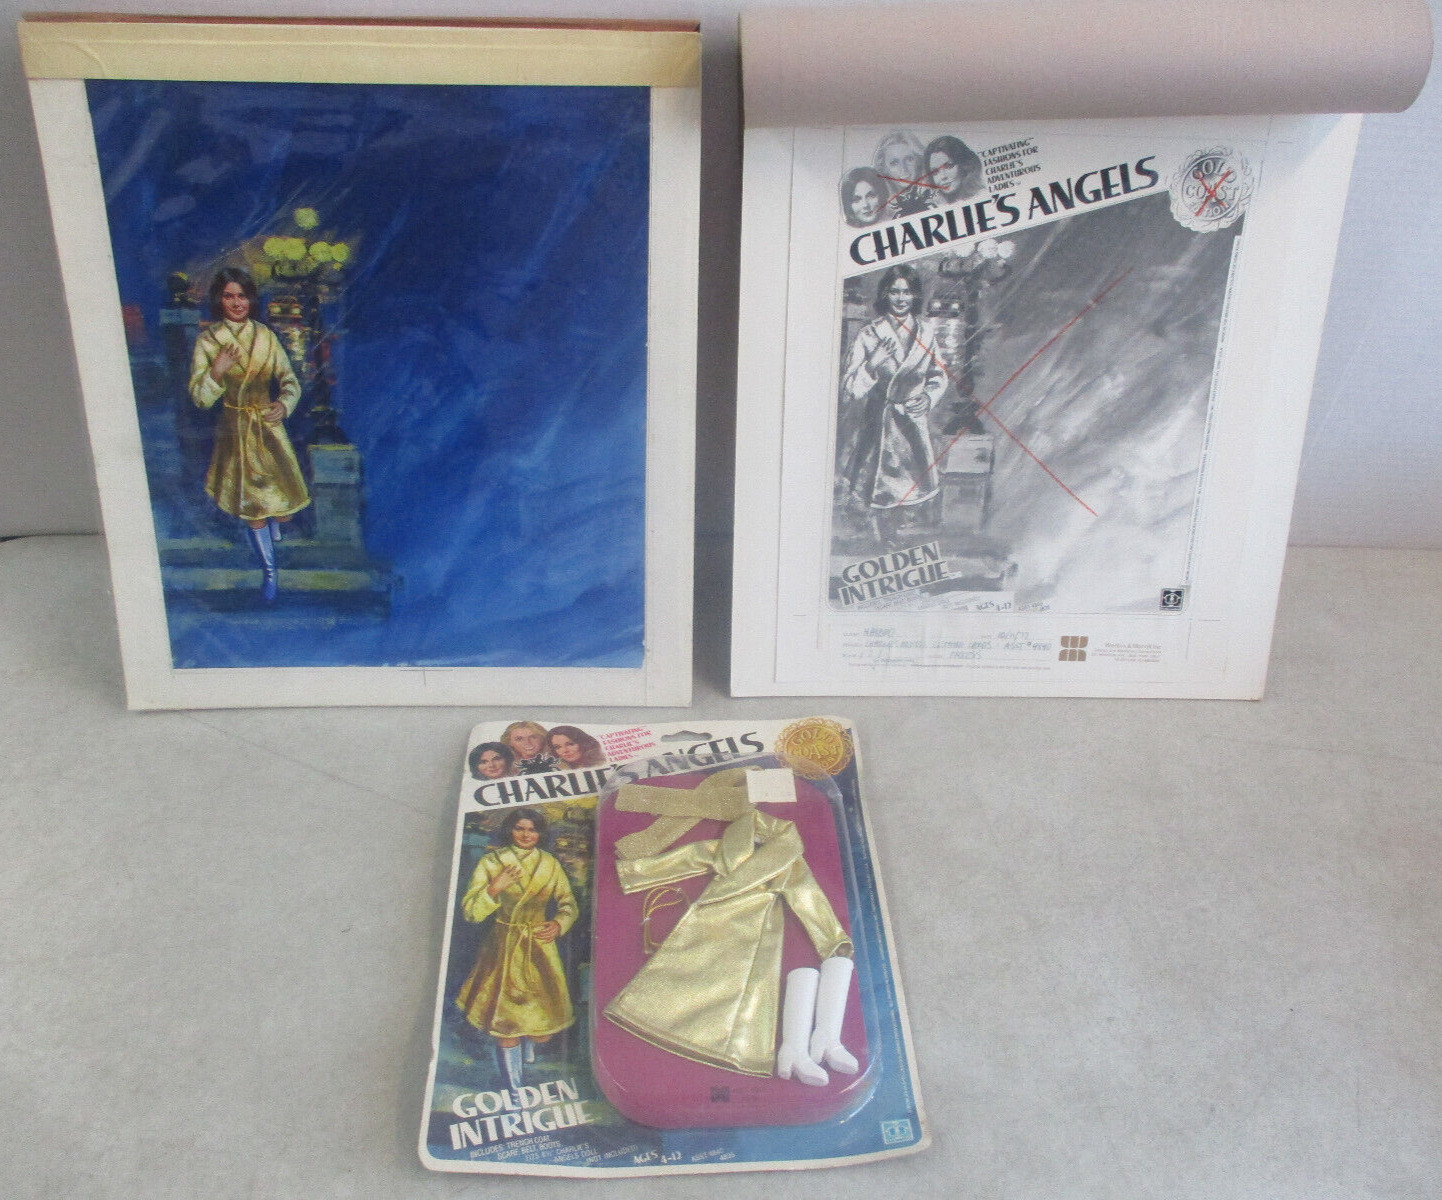 1977 CHARLIE'S ANGELS DOLL GOLDEN INTRIGUE ACCESSORY ORIGINAL ART MOCK UP & TOY